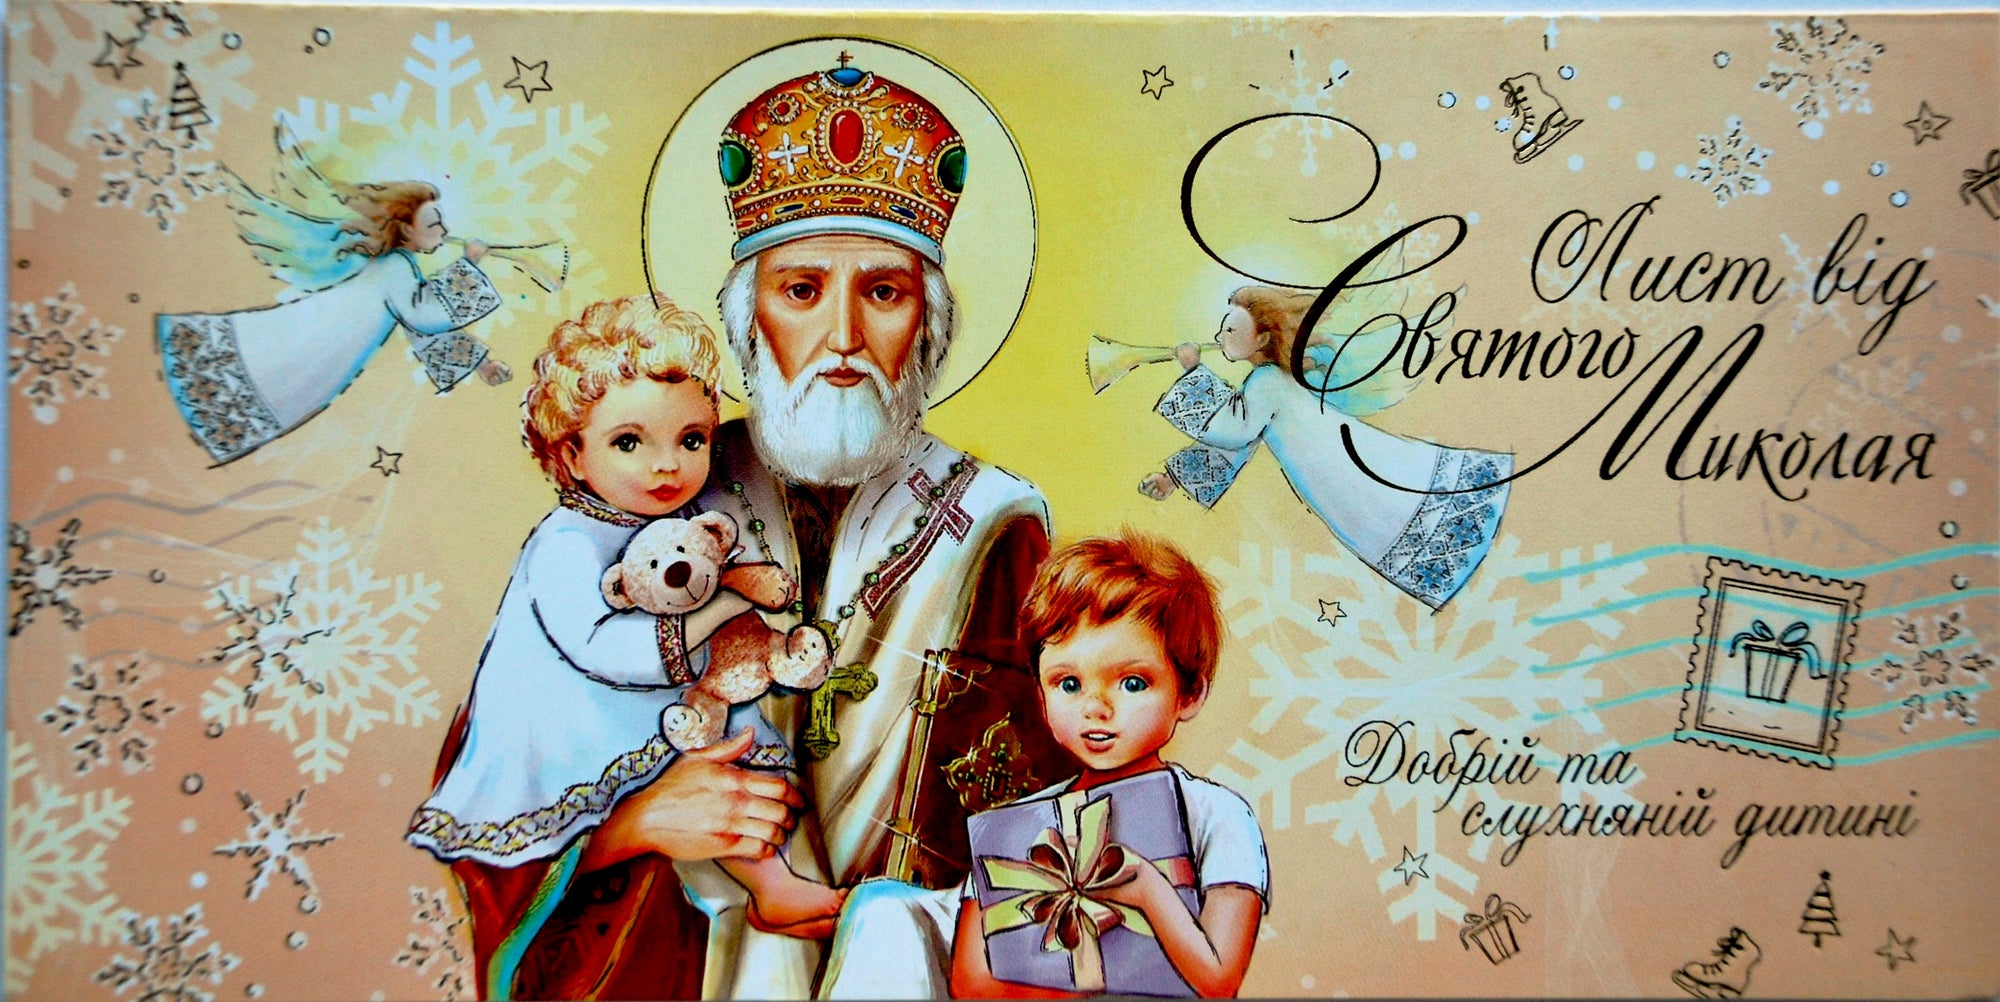 Letter from St. Nicholas